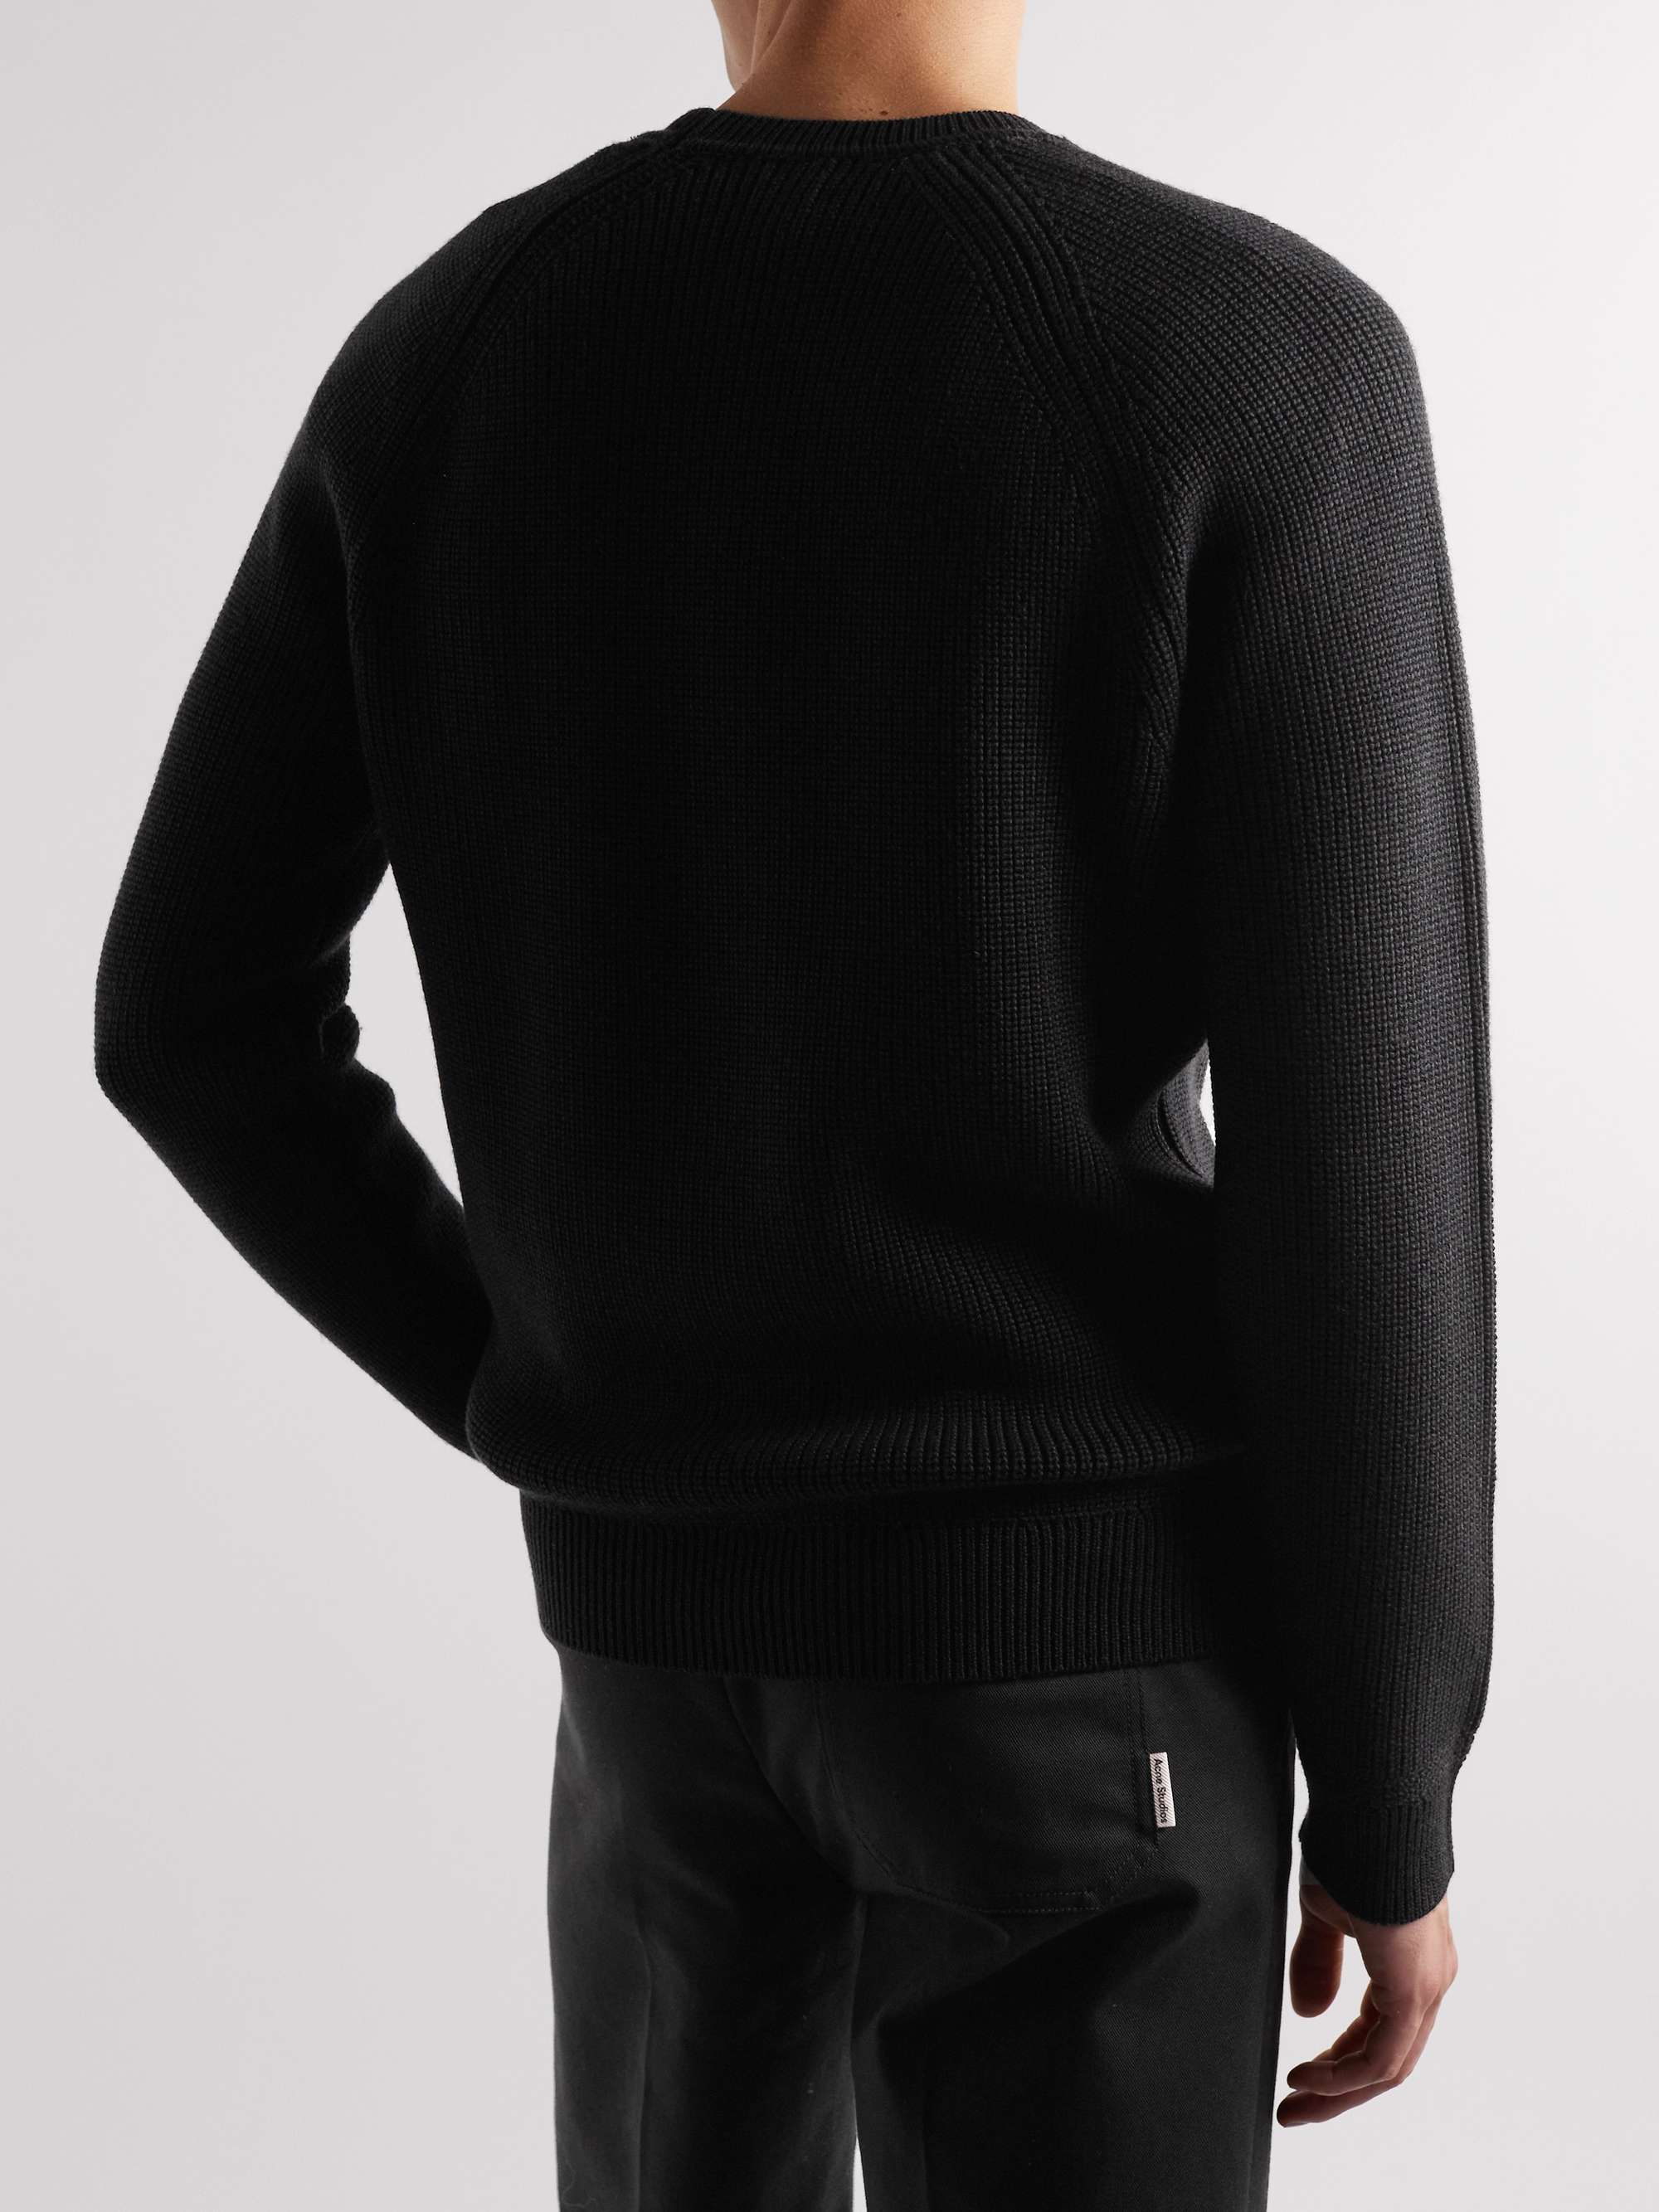 TOM FORD Slim-Fit Ribbed Wool and Silk-Blend Sweater